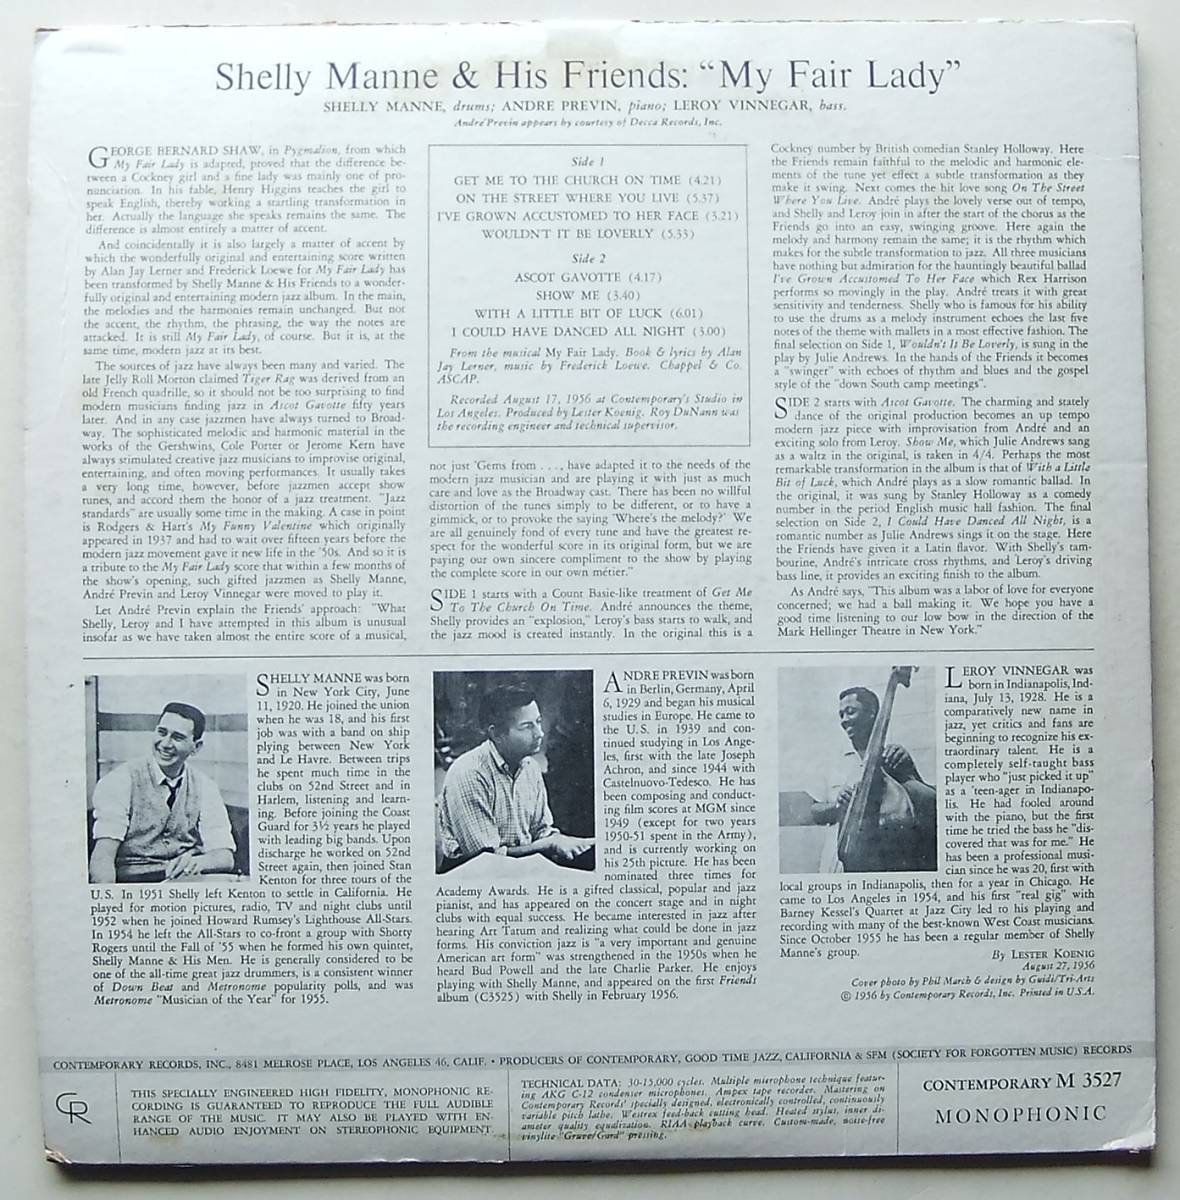 ◆ SHELLY MANNE & His Friends / My Fair Lady ◆ Contemporary M3527 (yellow:dg) ◆ S_画像2